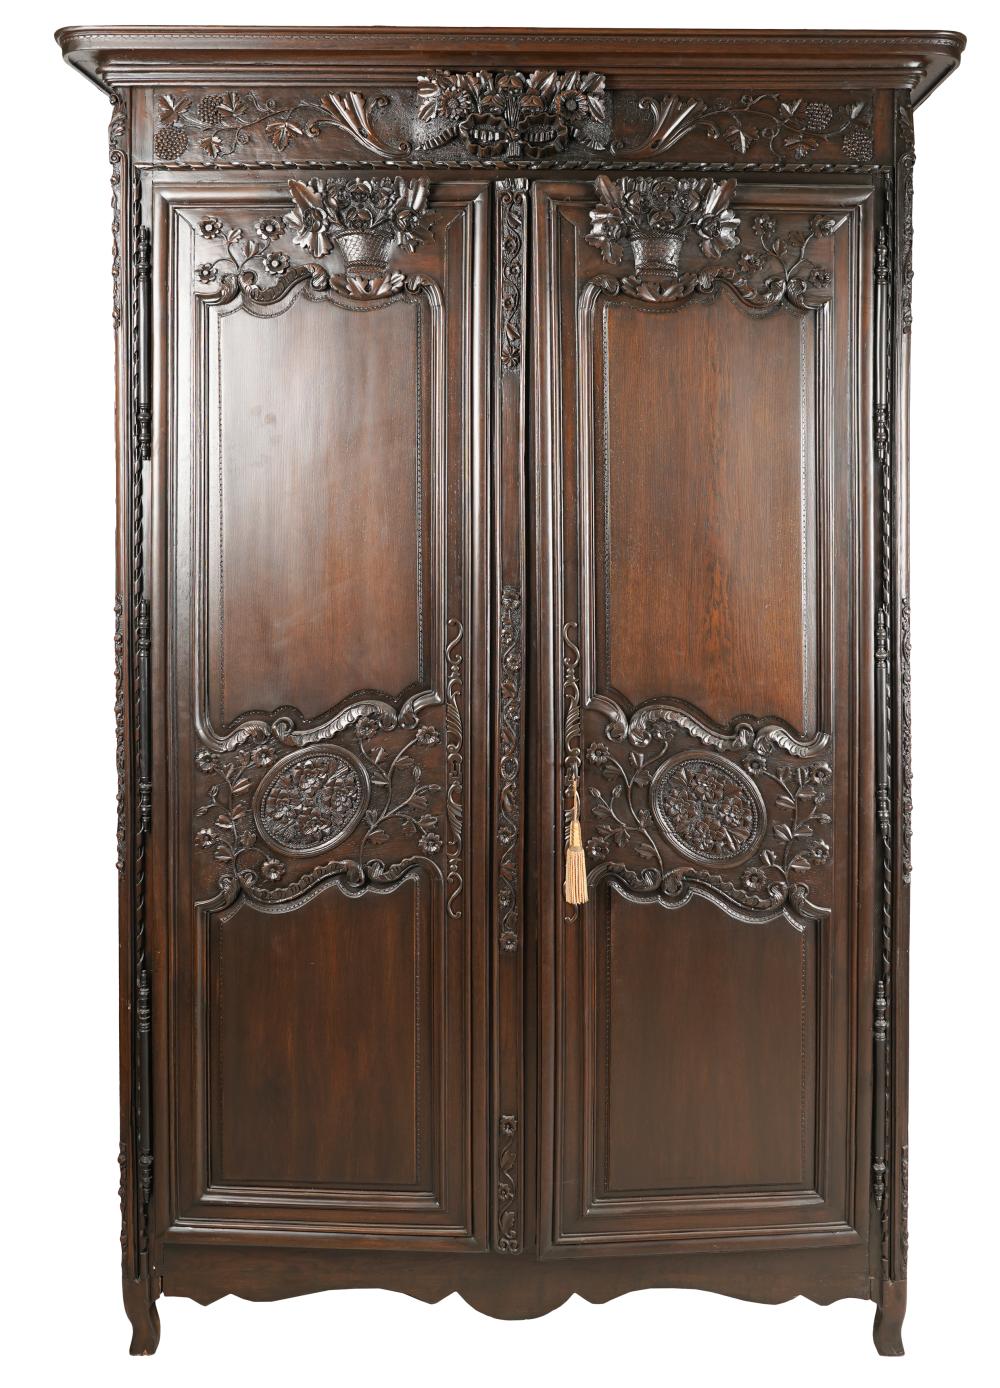 FRENCH PROVINCIAL STYLE CARVED 325820